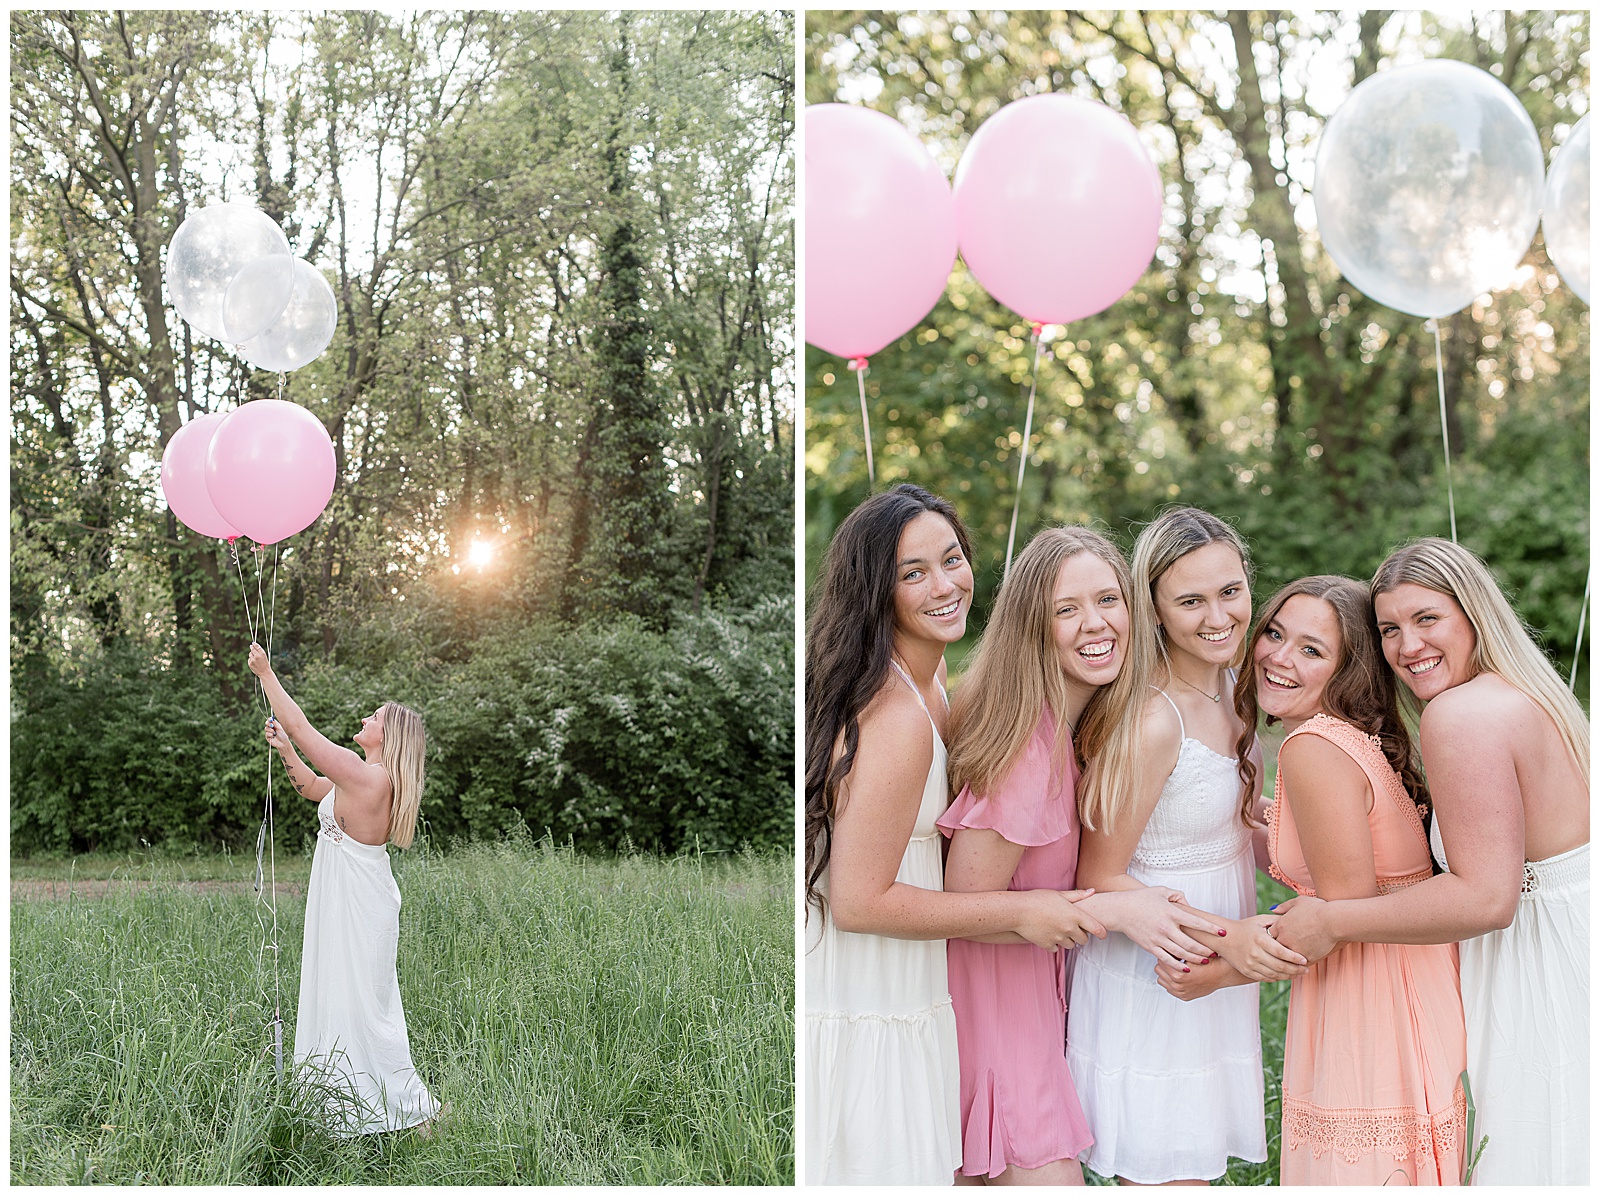 group of senior girls wearing colorful pastel and white dresses huddled together smiling and holding extra large pink and white balloons by trees